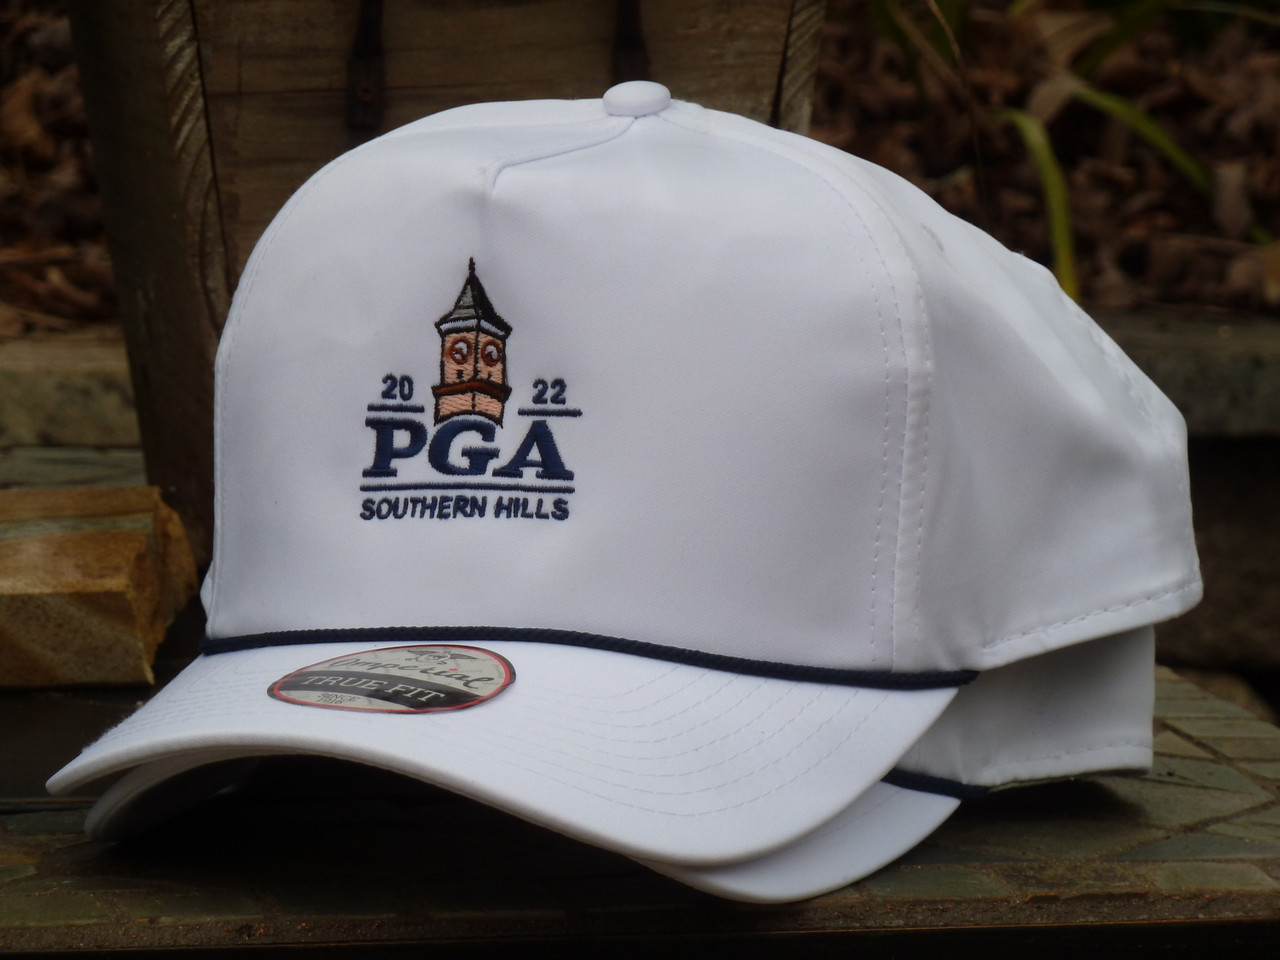 PGA Championship 2022 Southern Hills hat - Wrightson Imperial White with Rope